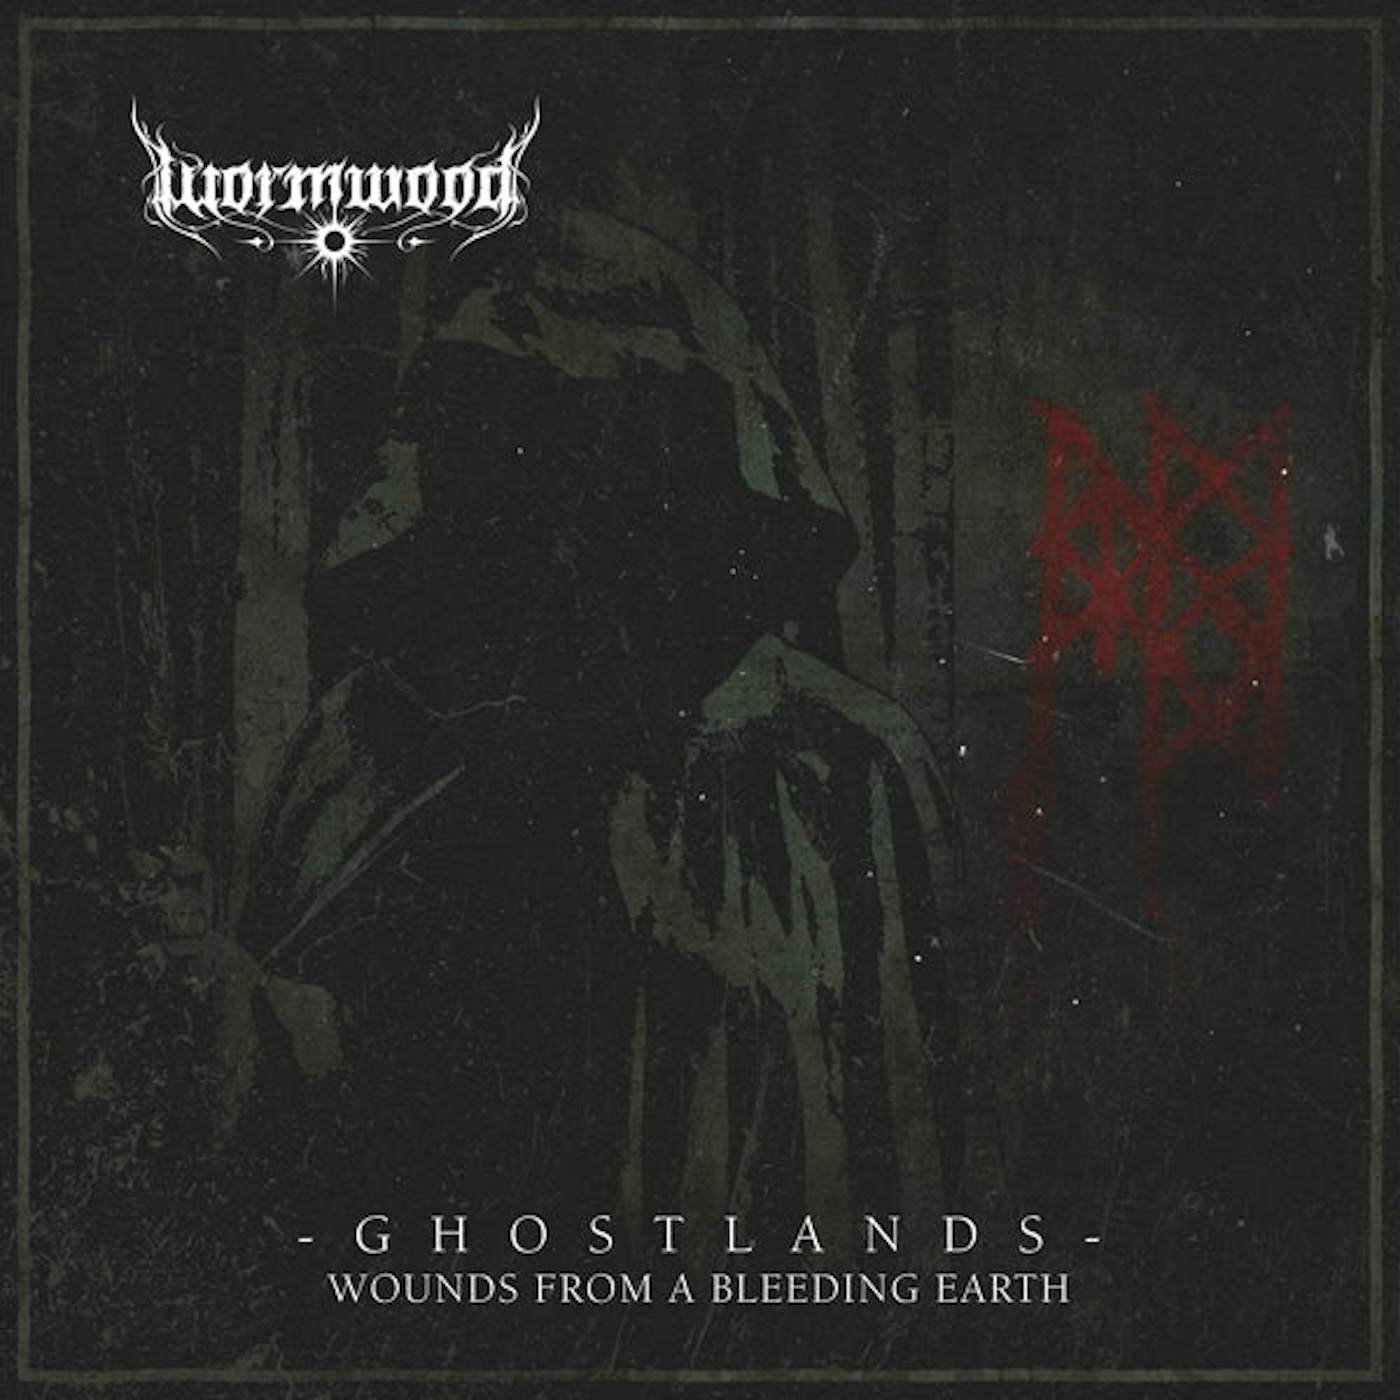 Wormwood LP - Ghostlands €“ Wounds From A Bleeding Earth (Vinyl)